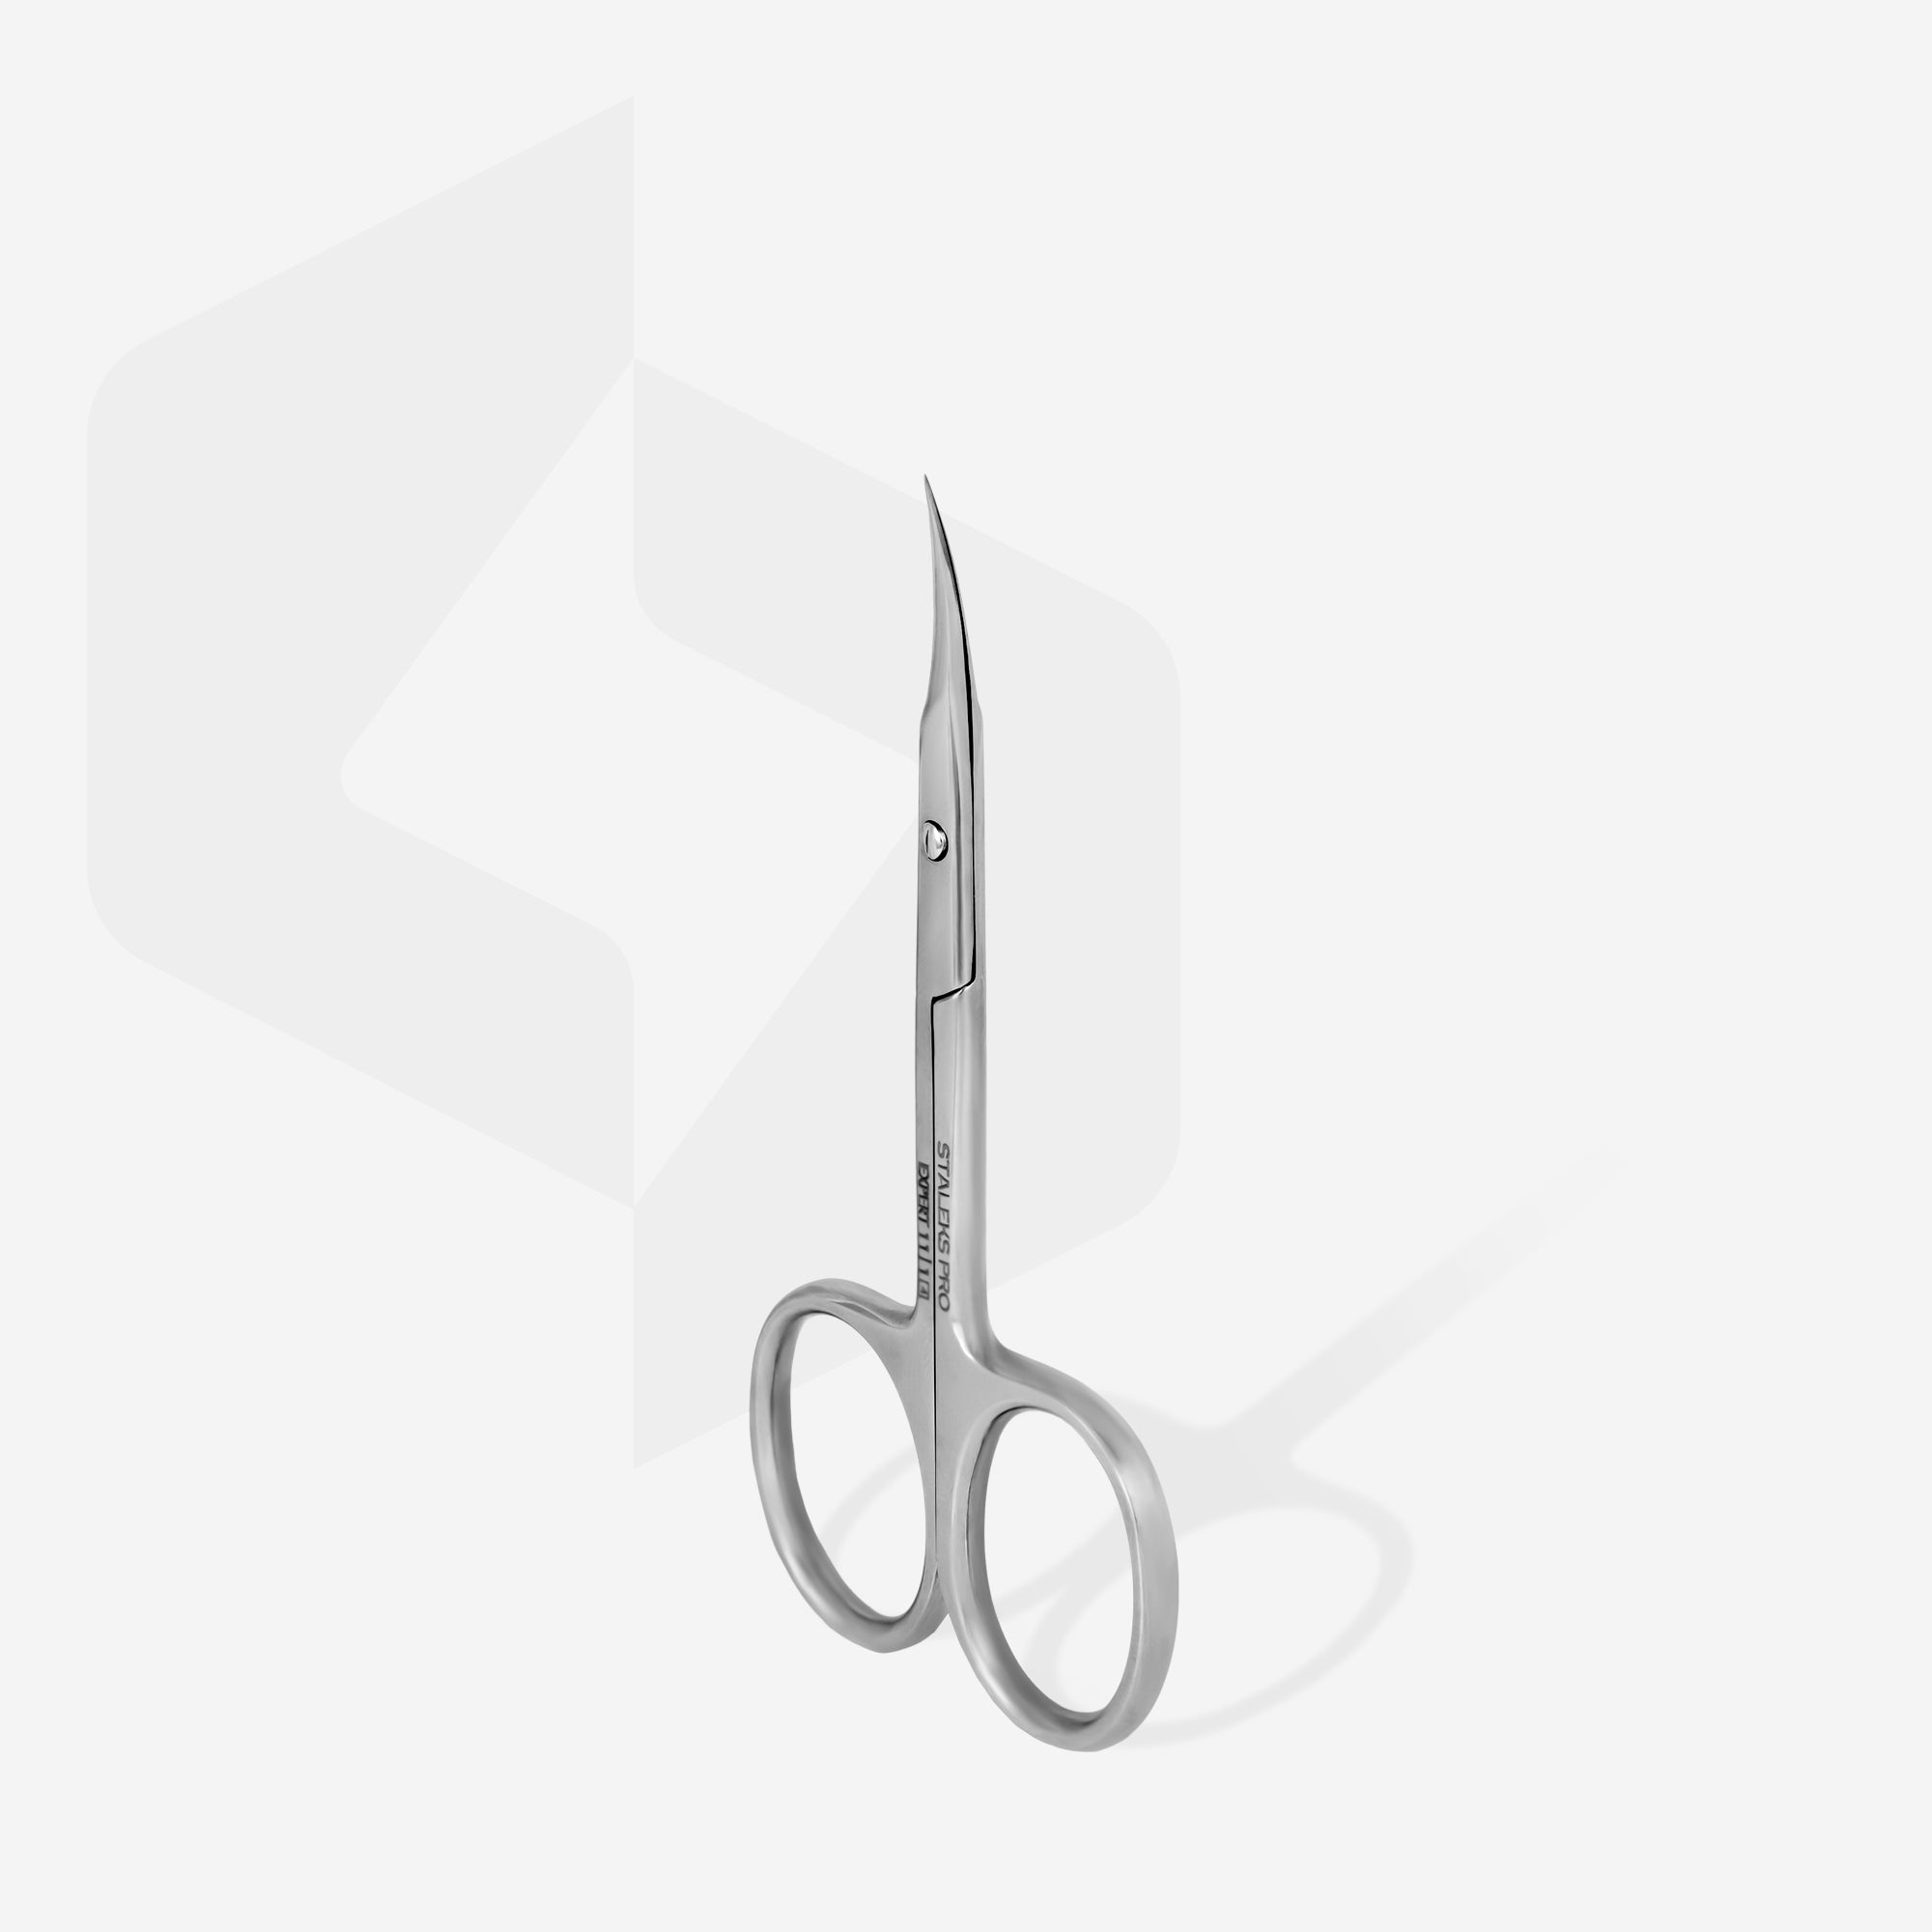 Professional cuticle scissors for left-handed users EXPERT 11 TYPE 1